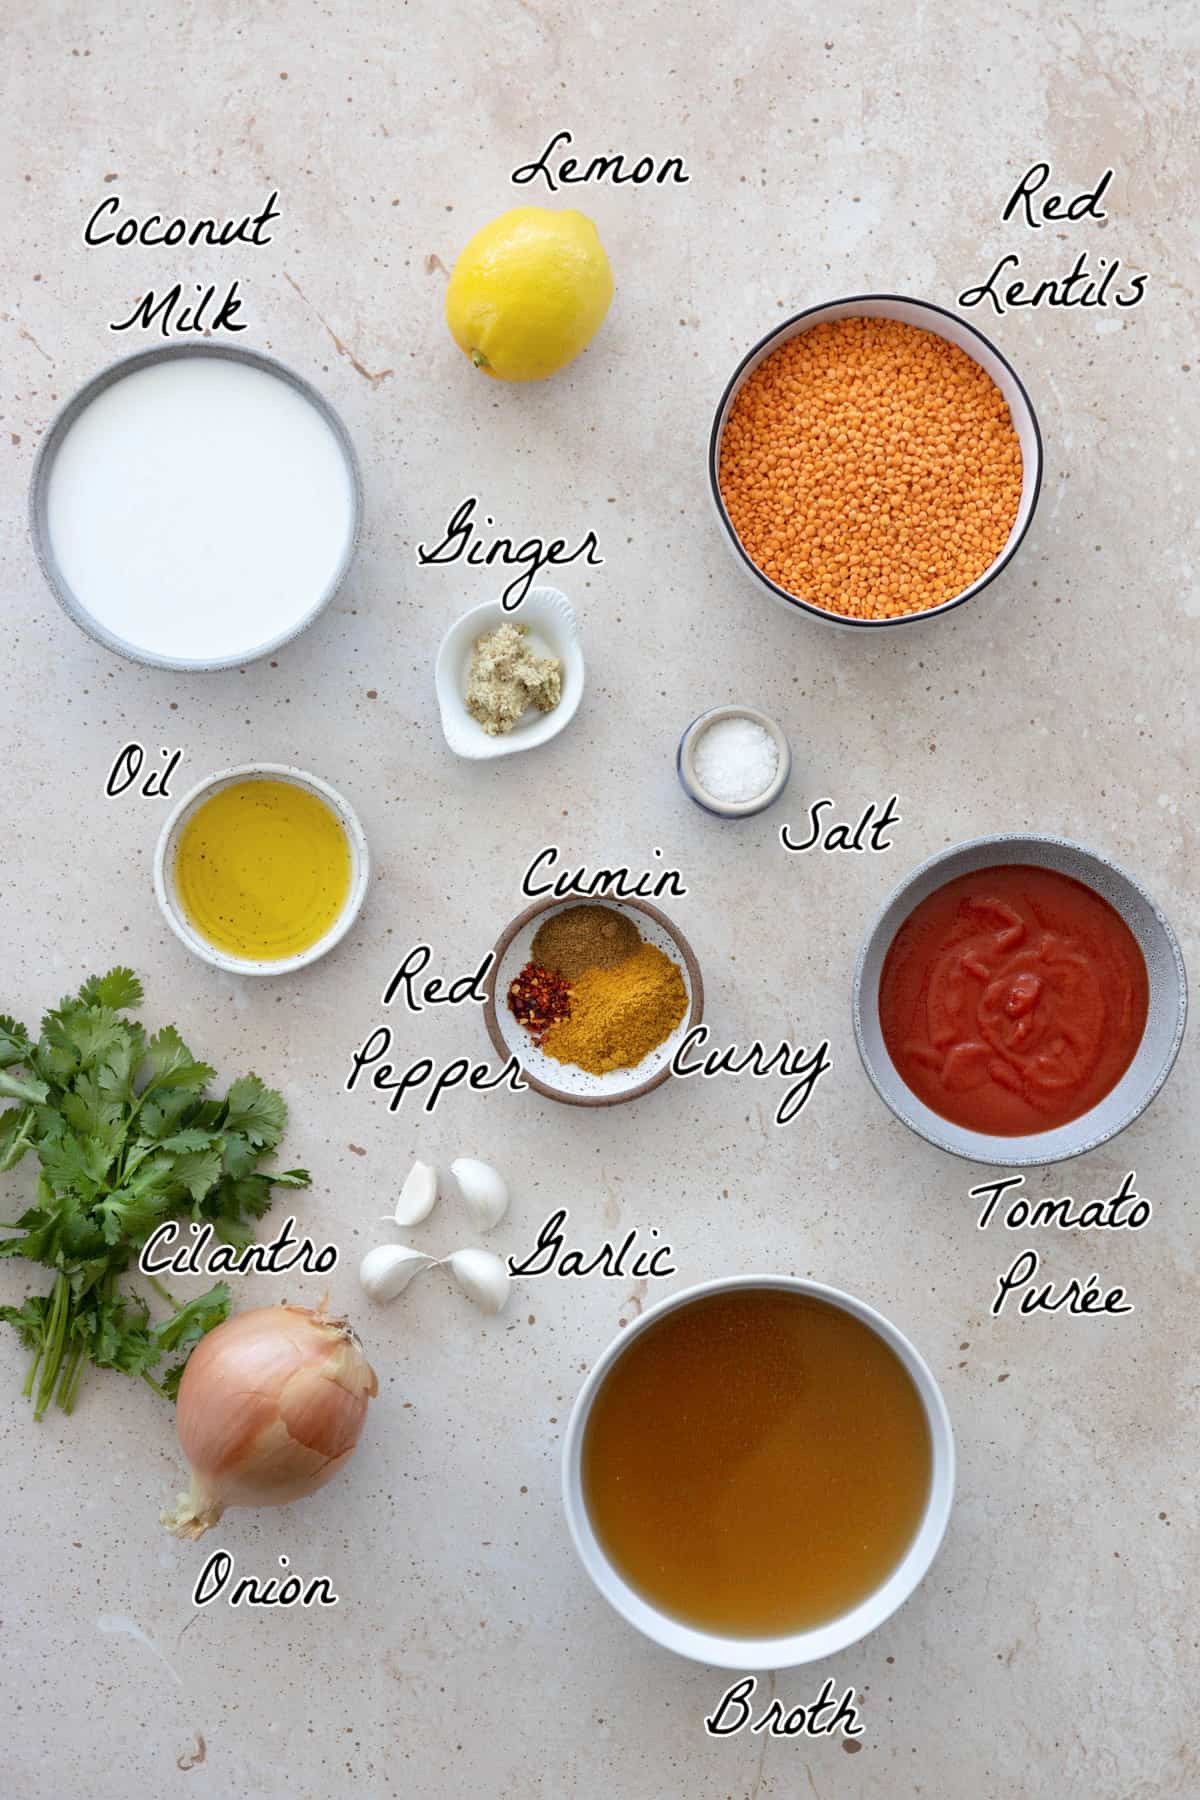 All ingredients to make dahl on a table top.